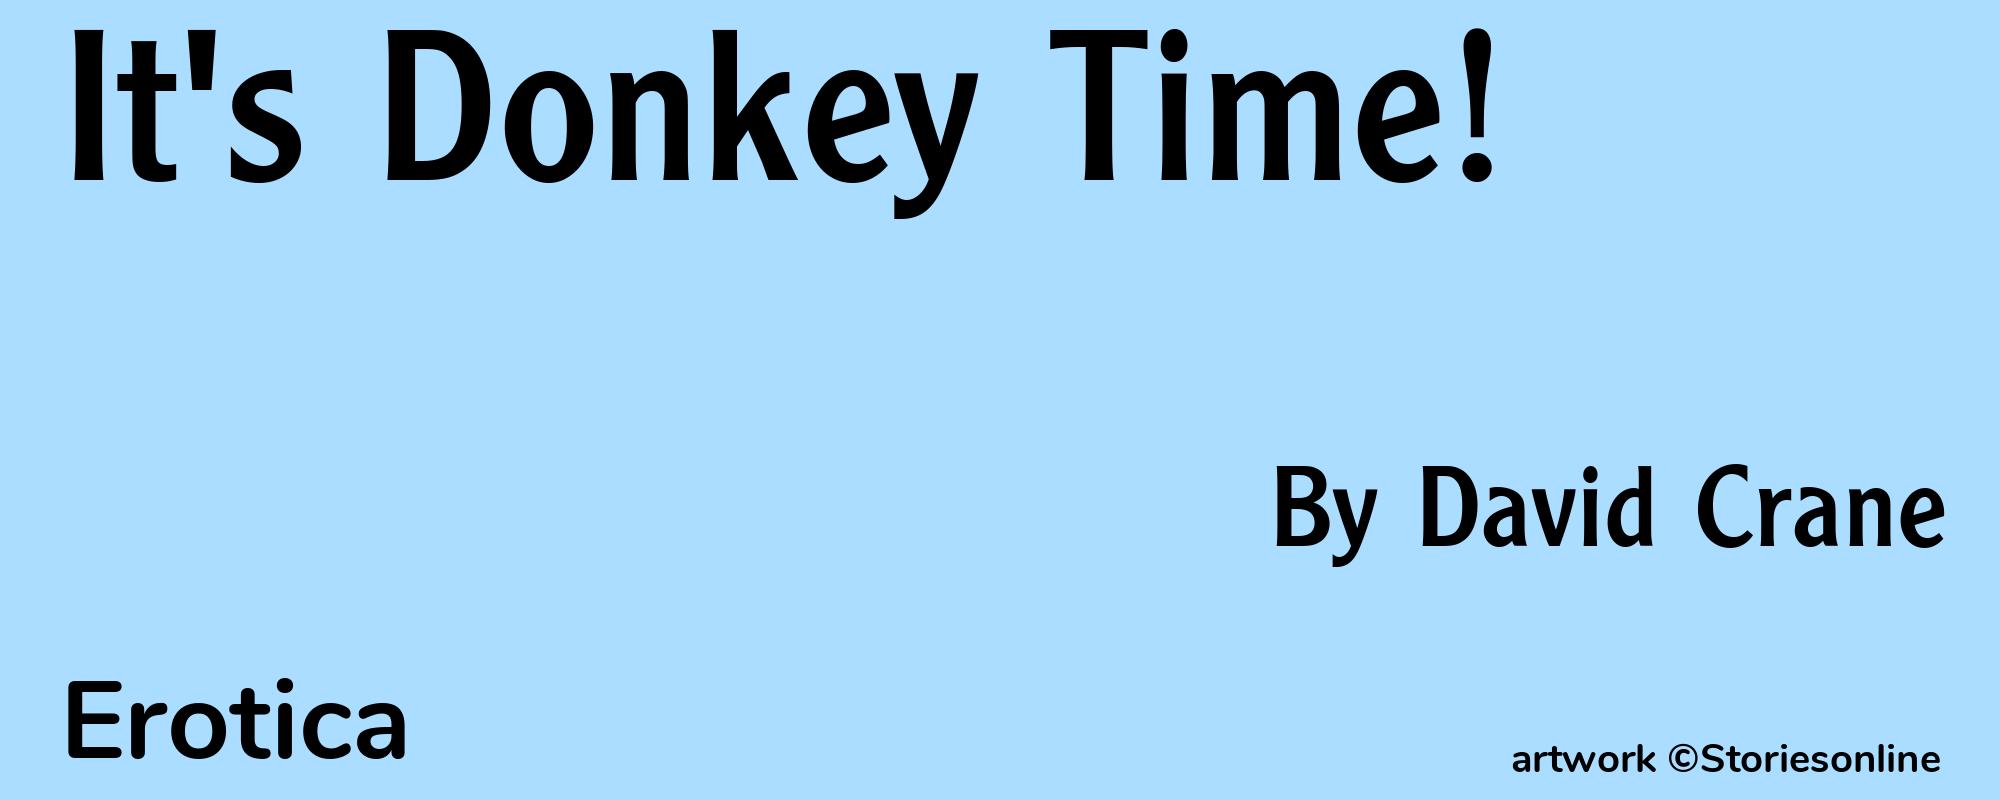 It's Donkey Time! - Cover